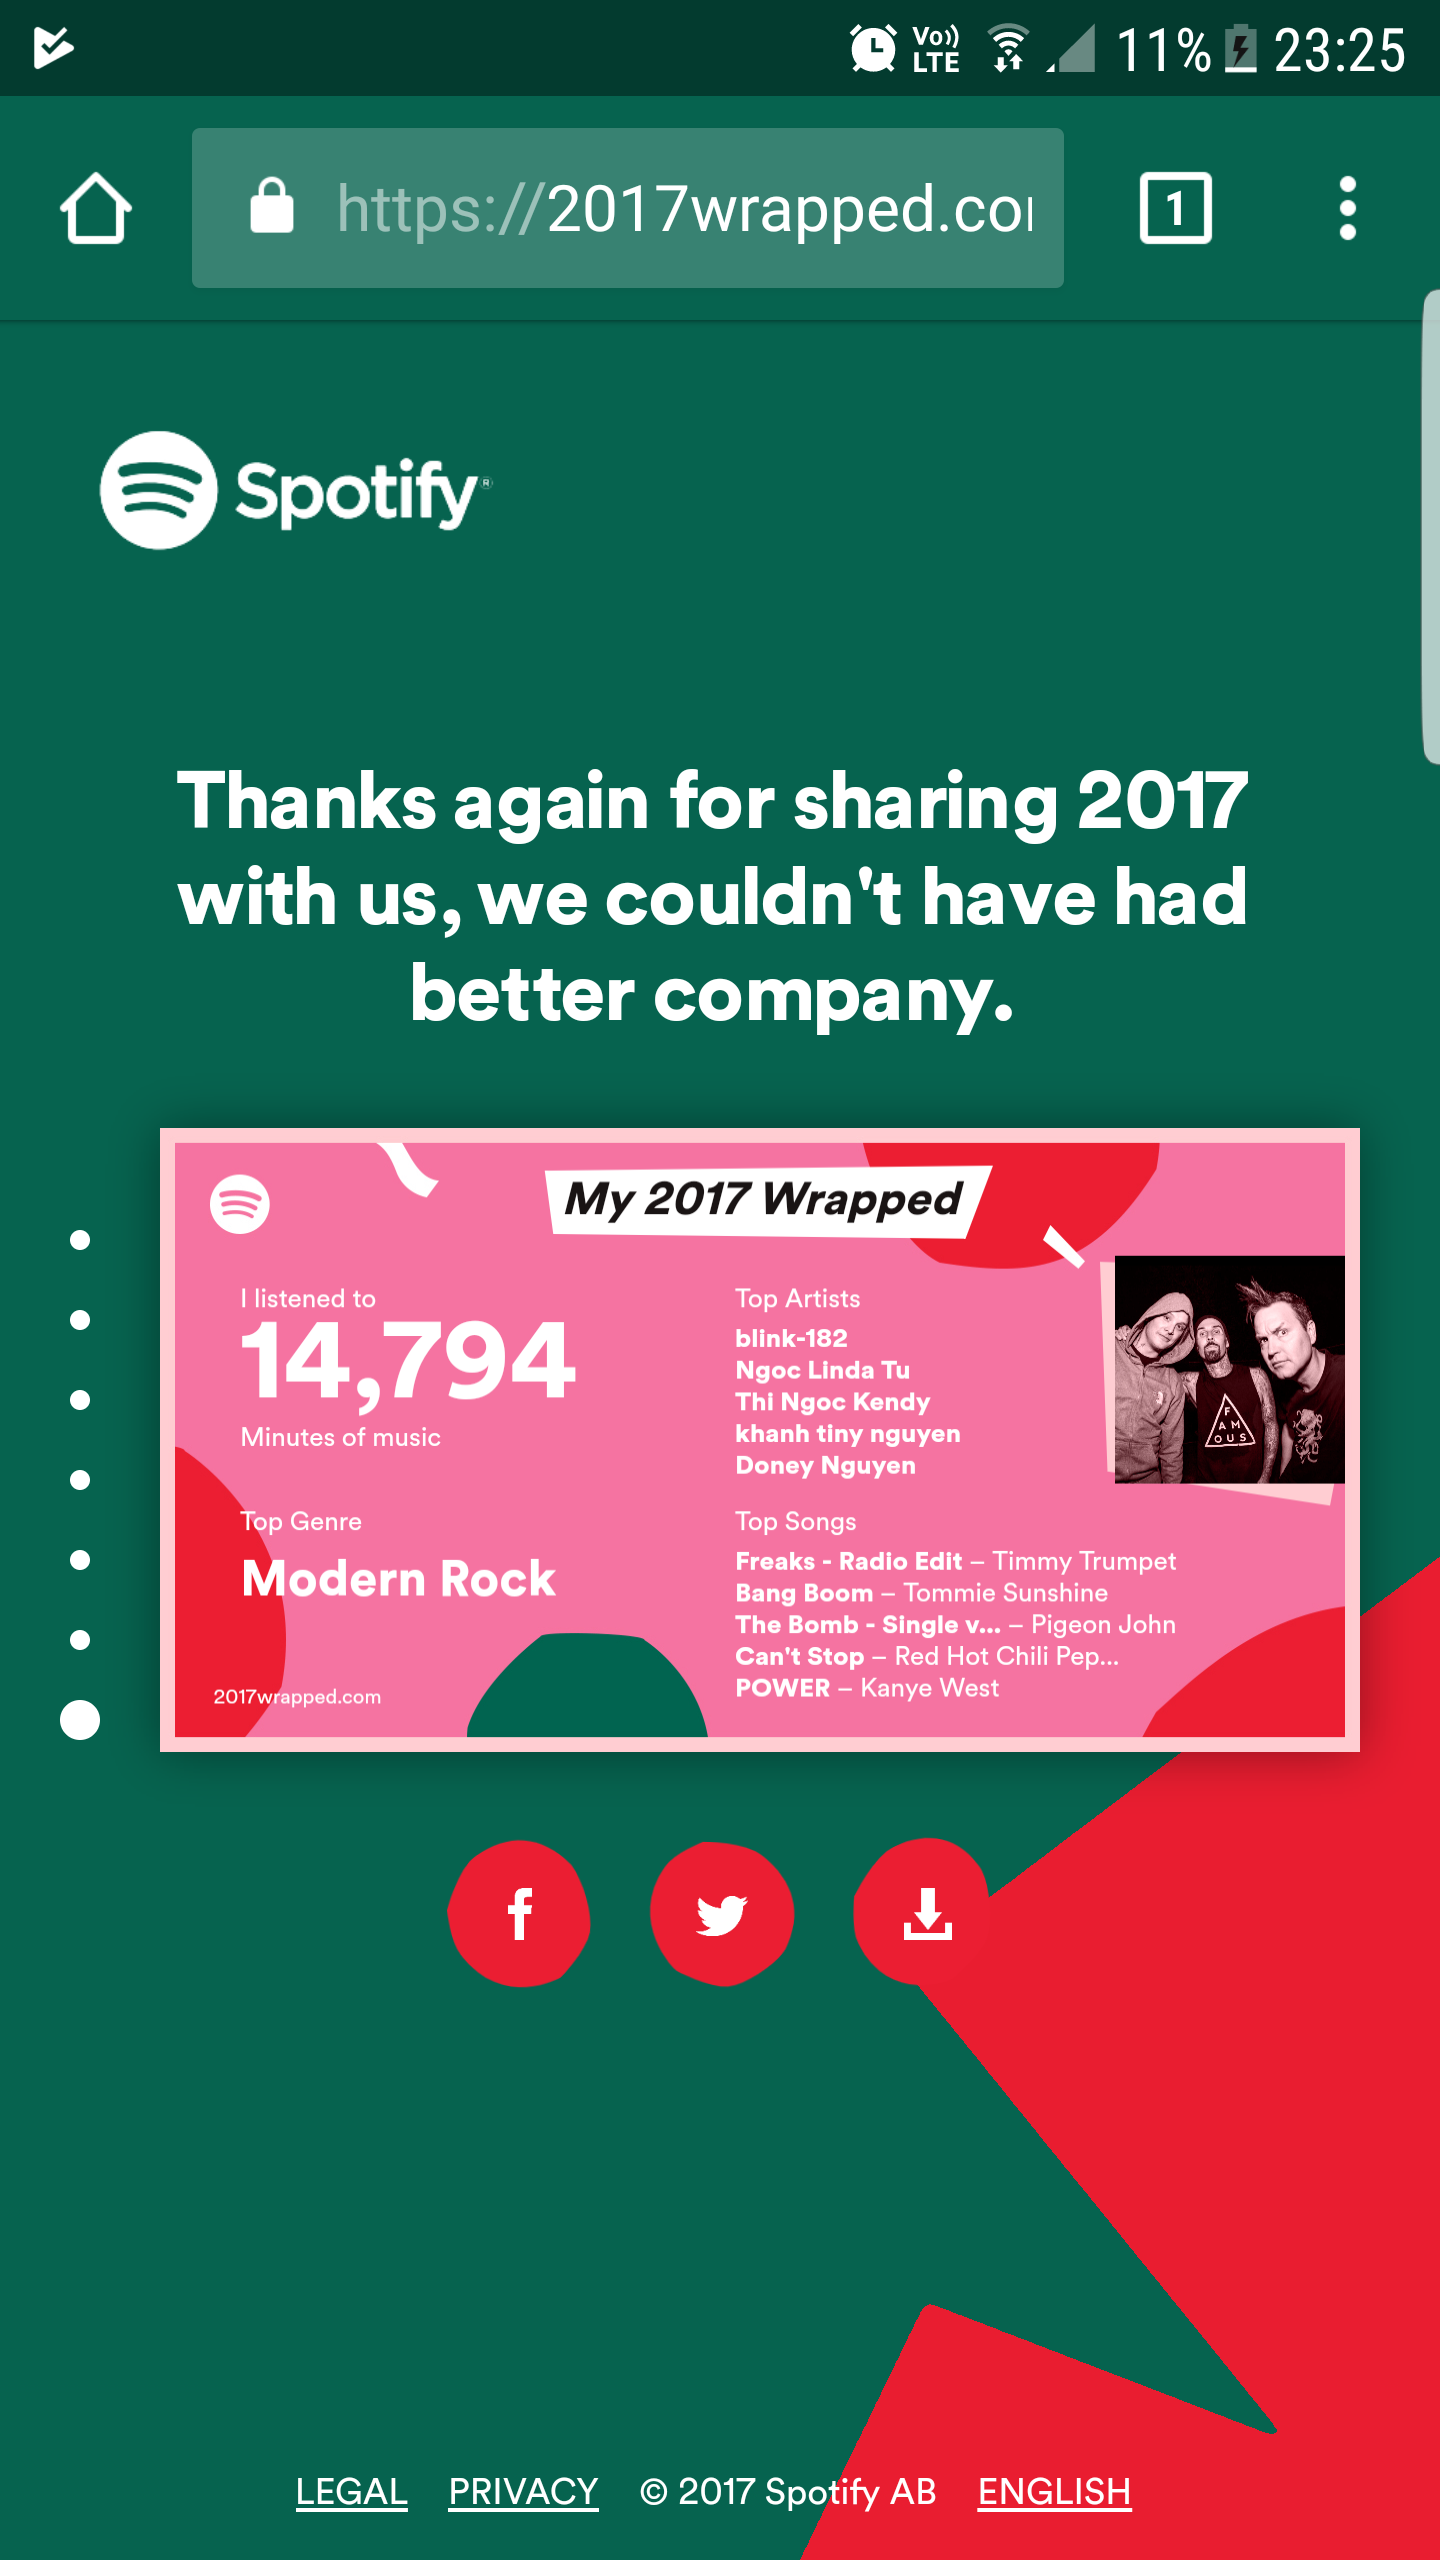 Your 2017 Wrapped - Page 2 - The Spotify Community